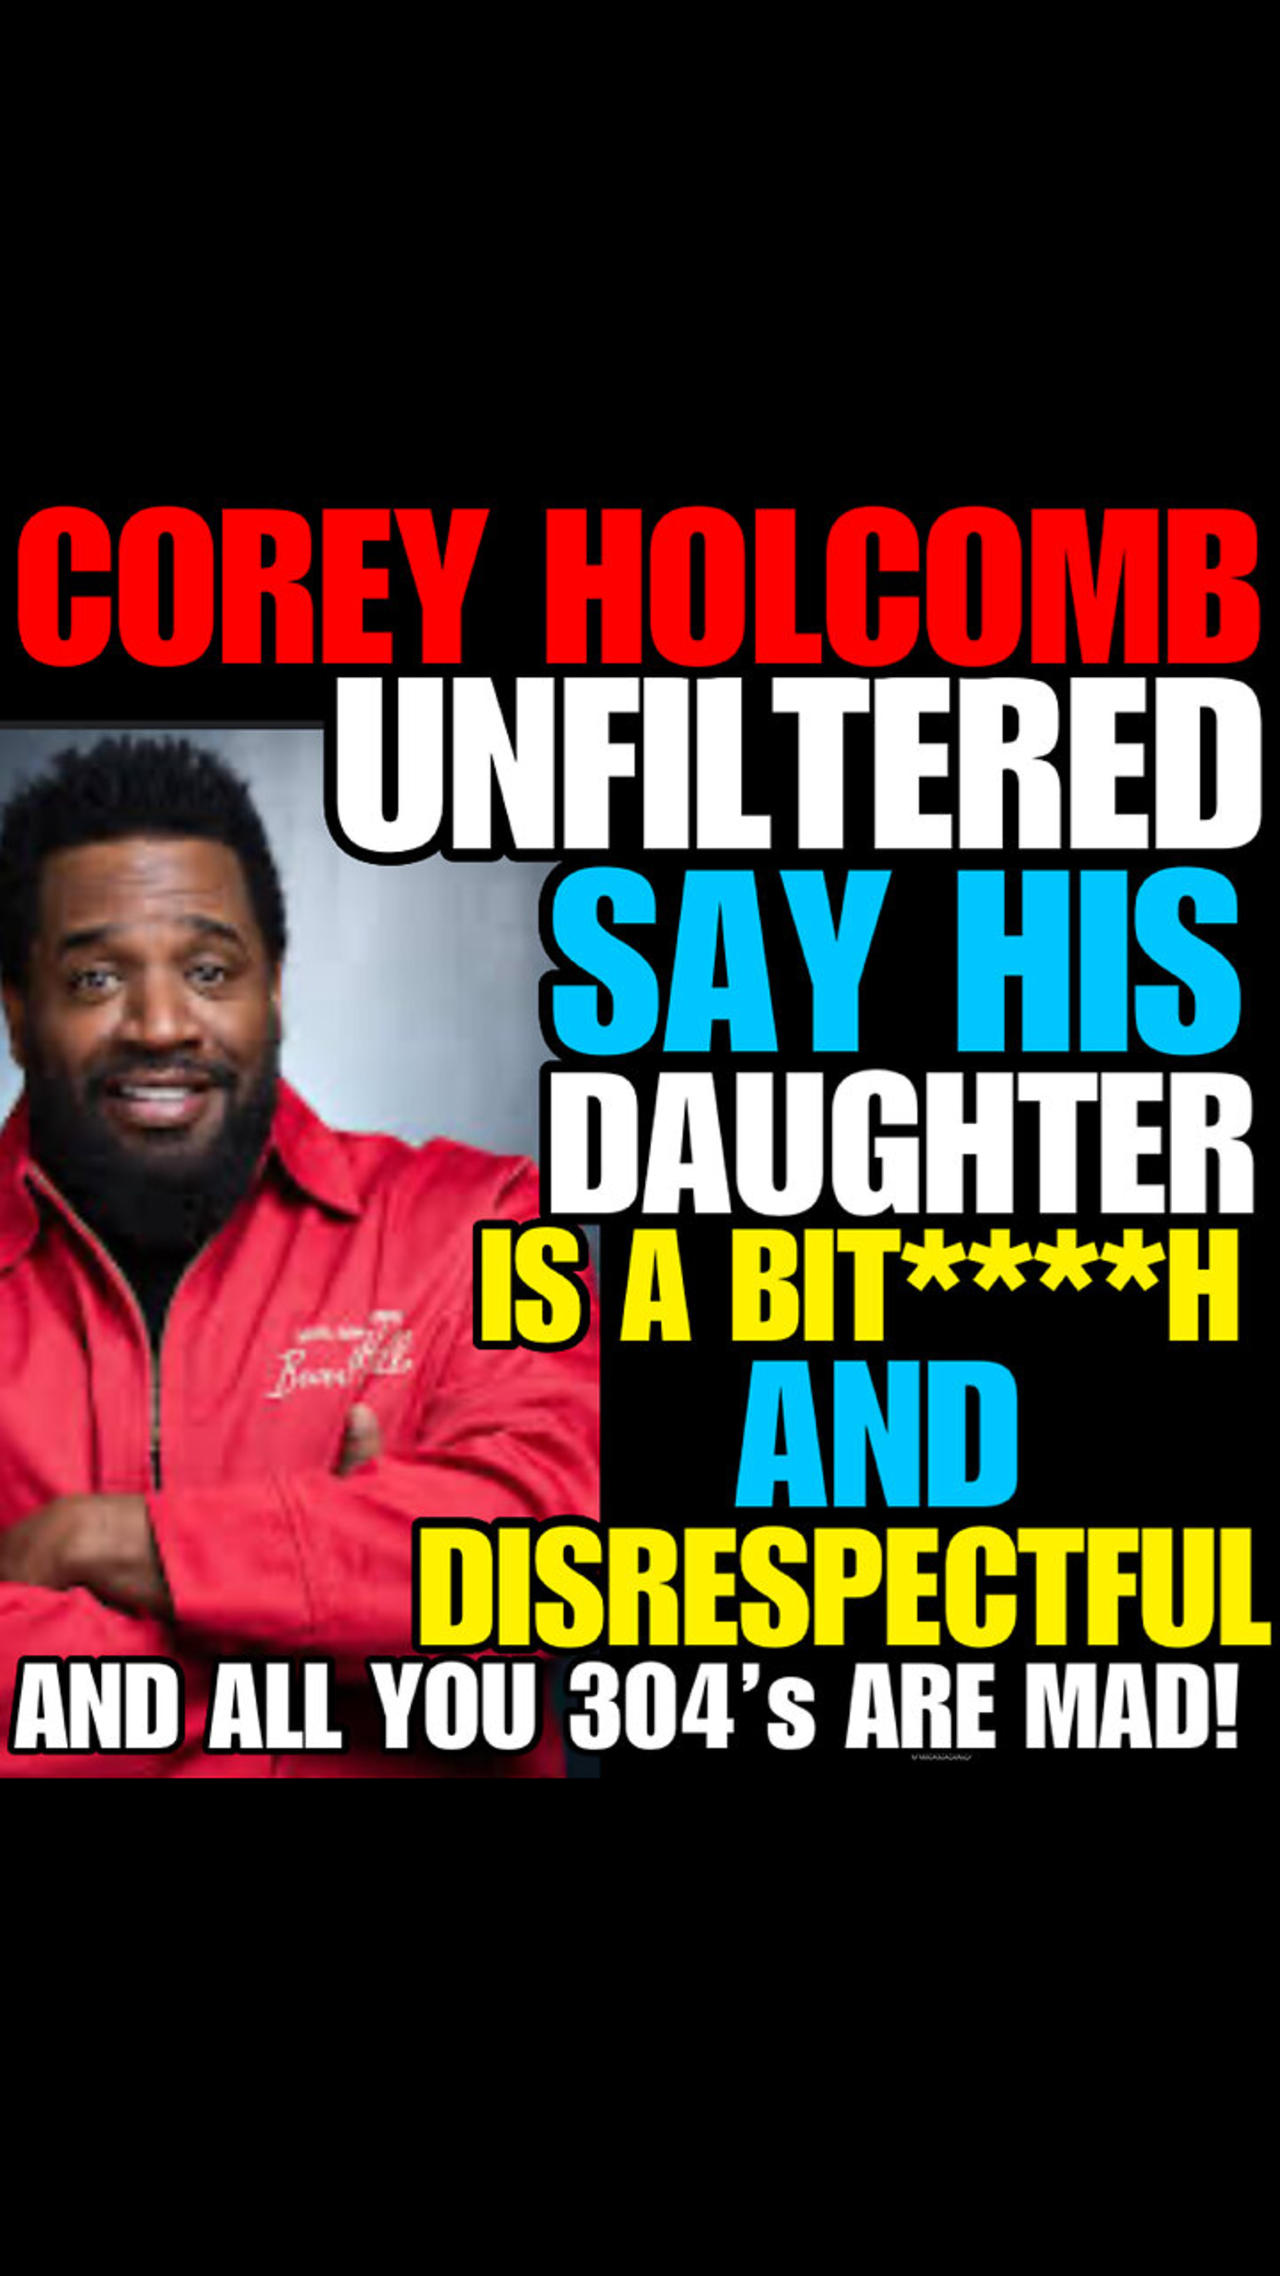 NIMH Ep #758 Corey Holcomb Unfiltered. Call his daughter a Bi**H & 304’s  are MAD!!!!